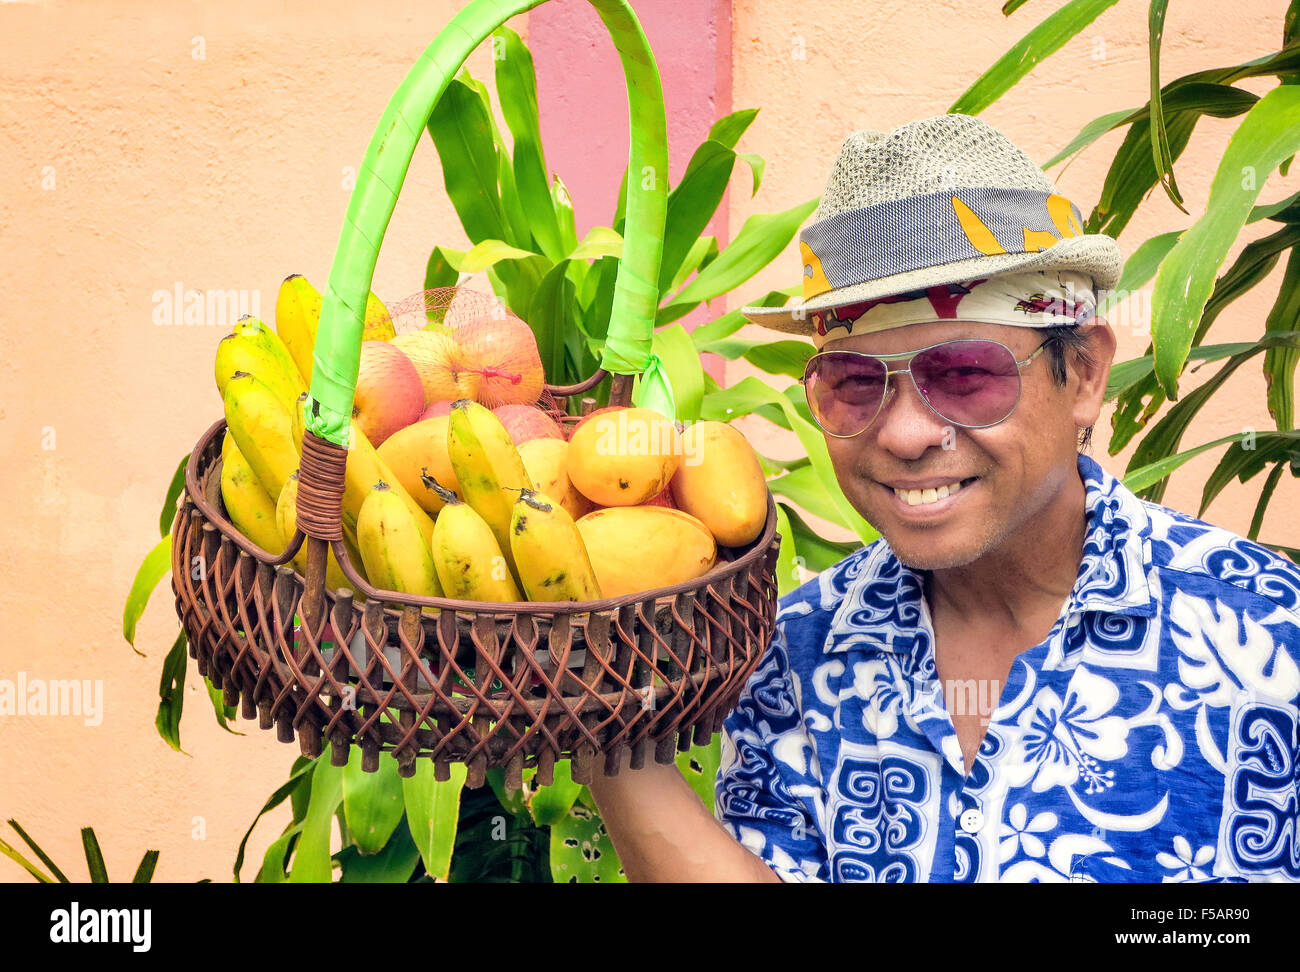 Portrait of a smiling Filipino man wearing a fedora hat, sunglasses and a flower shirt holding a basket of fresh fruit. Stock Photo